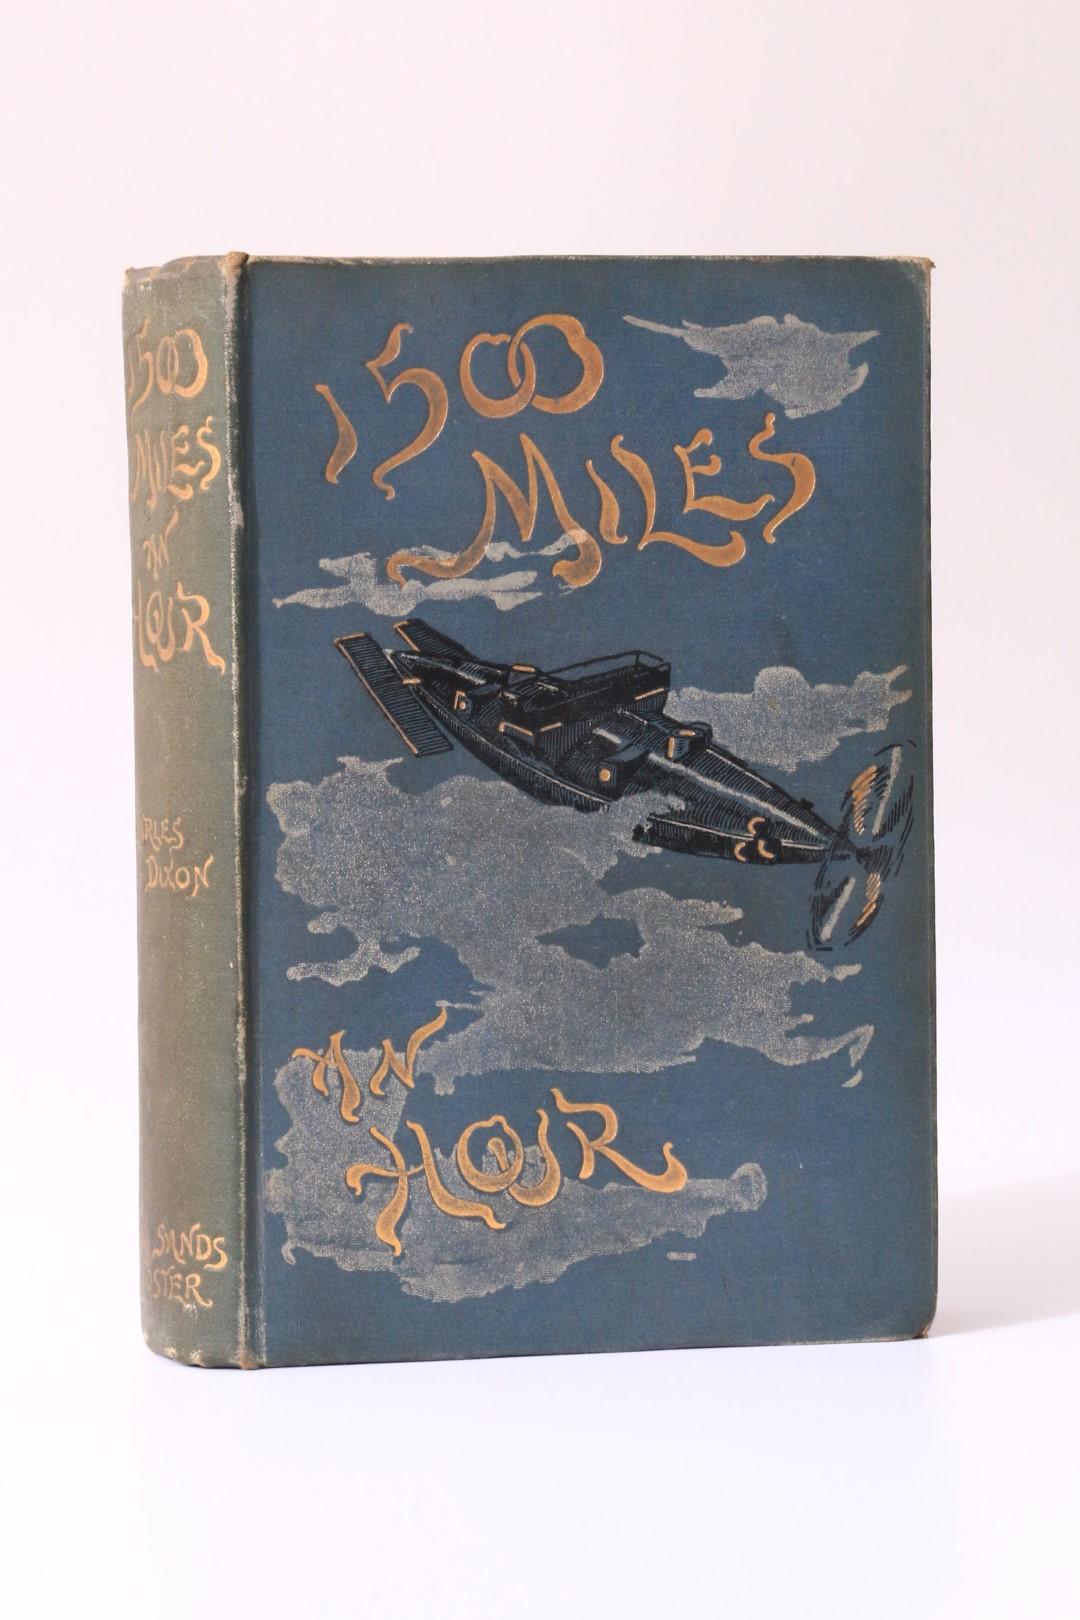 Charles Dixon - 1500 Miles an Hour - Bliss, Sands and Foster, 1895, First Edition.